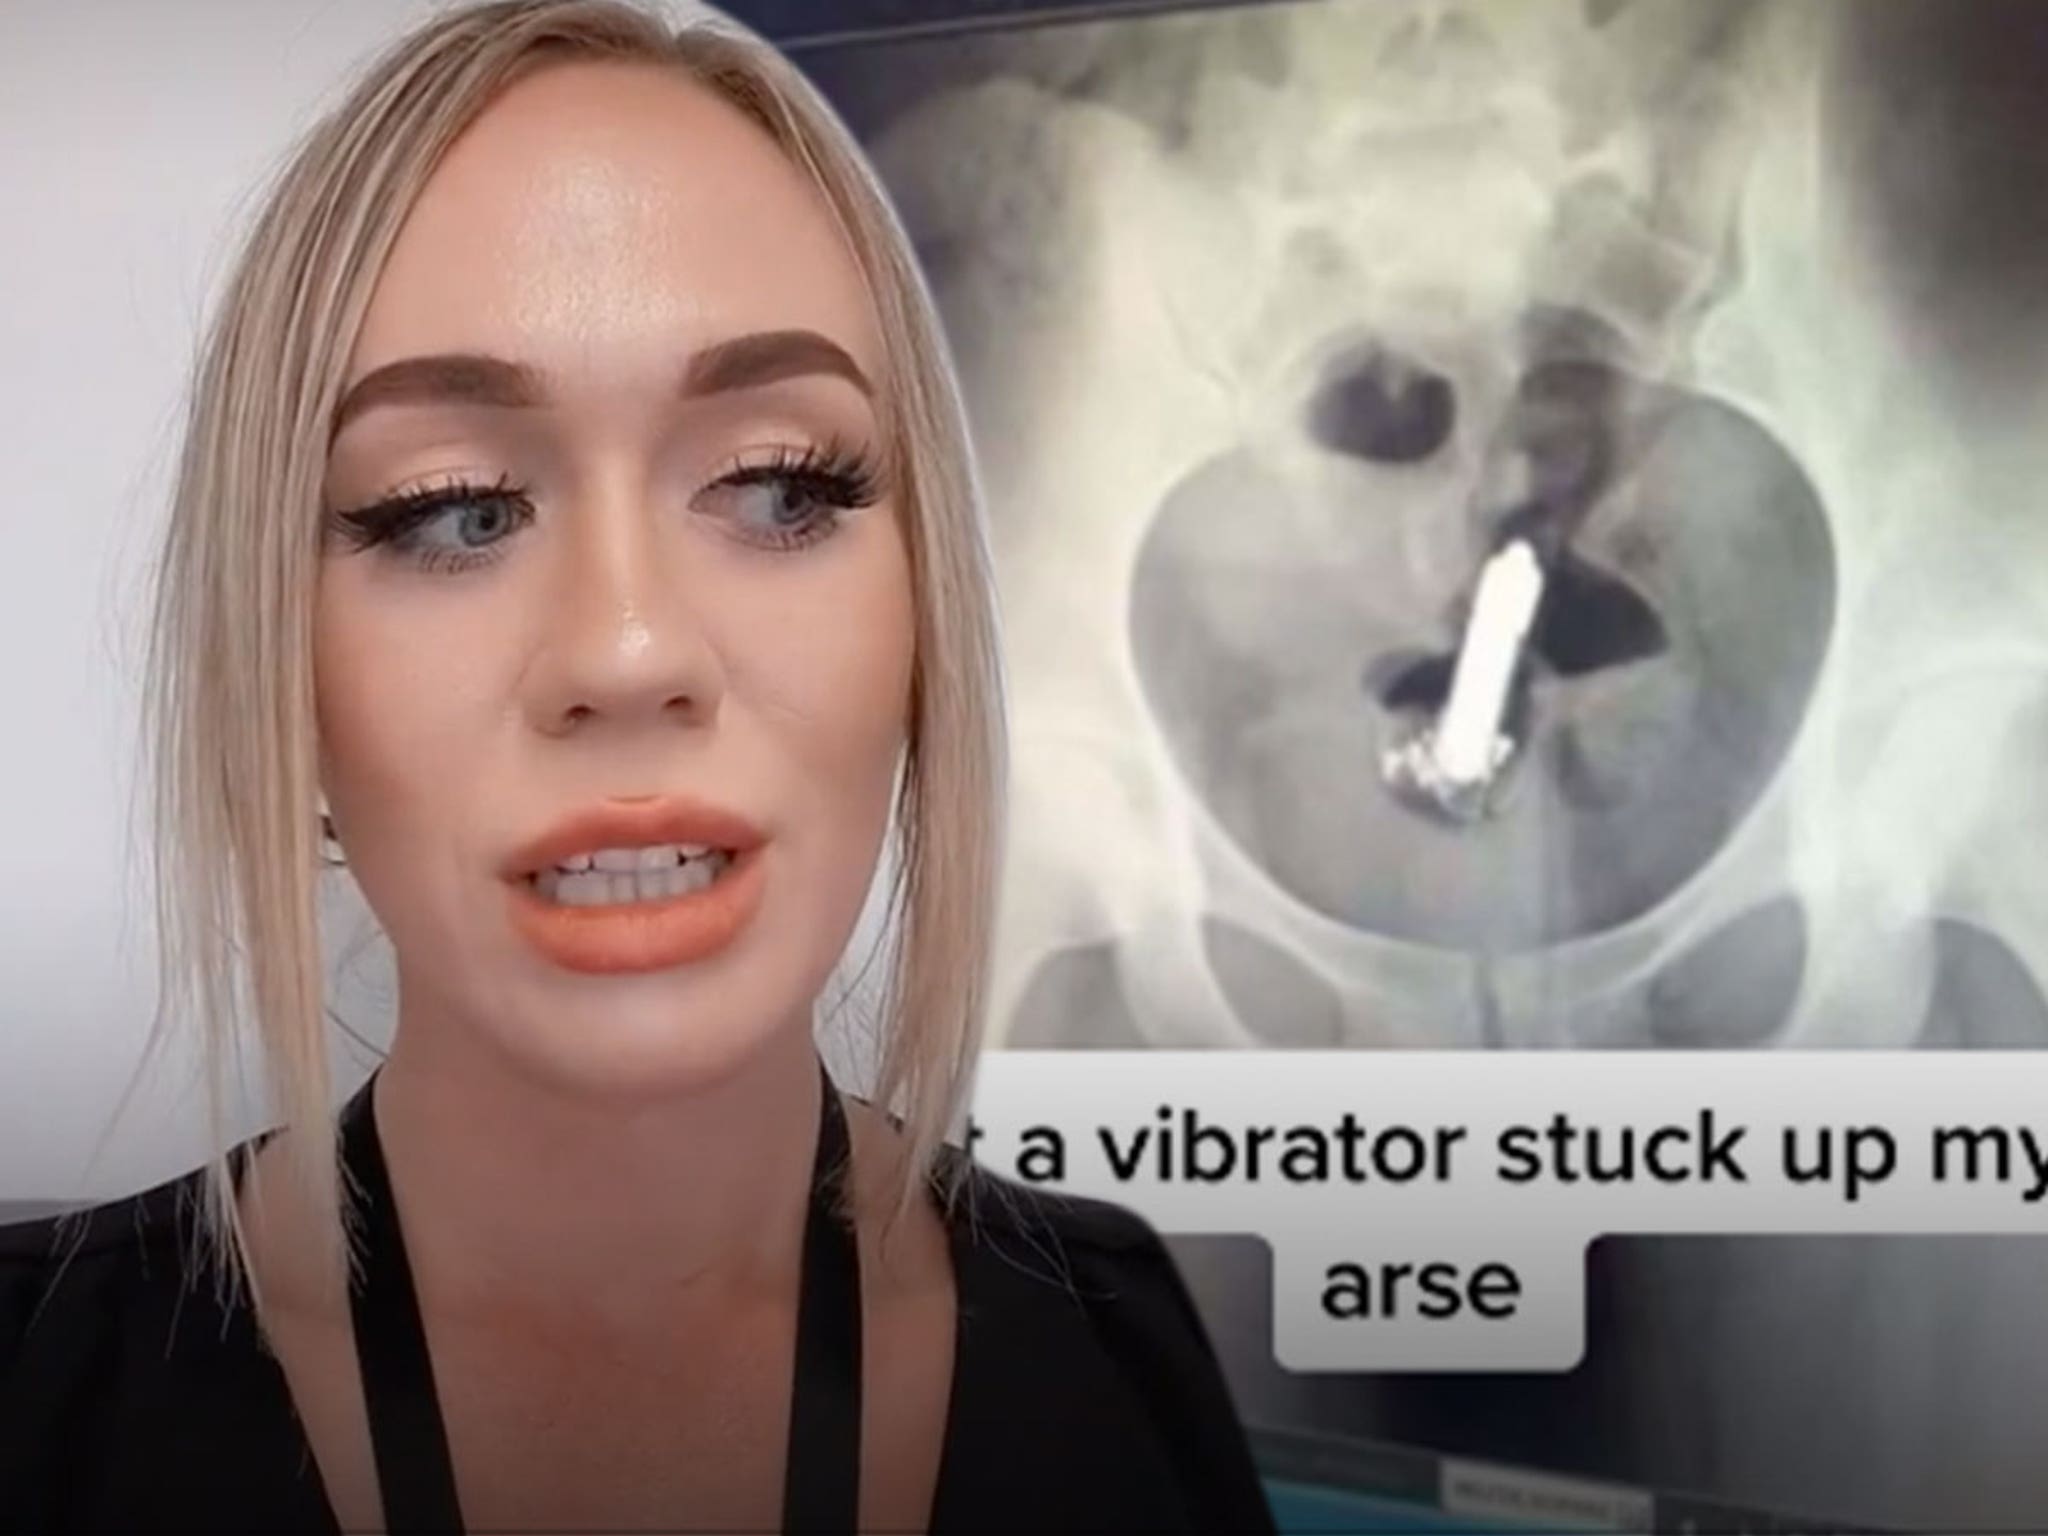 TikTok Star Says She Needed Surgery After Losing Vibrator in Butt pic pic